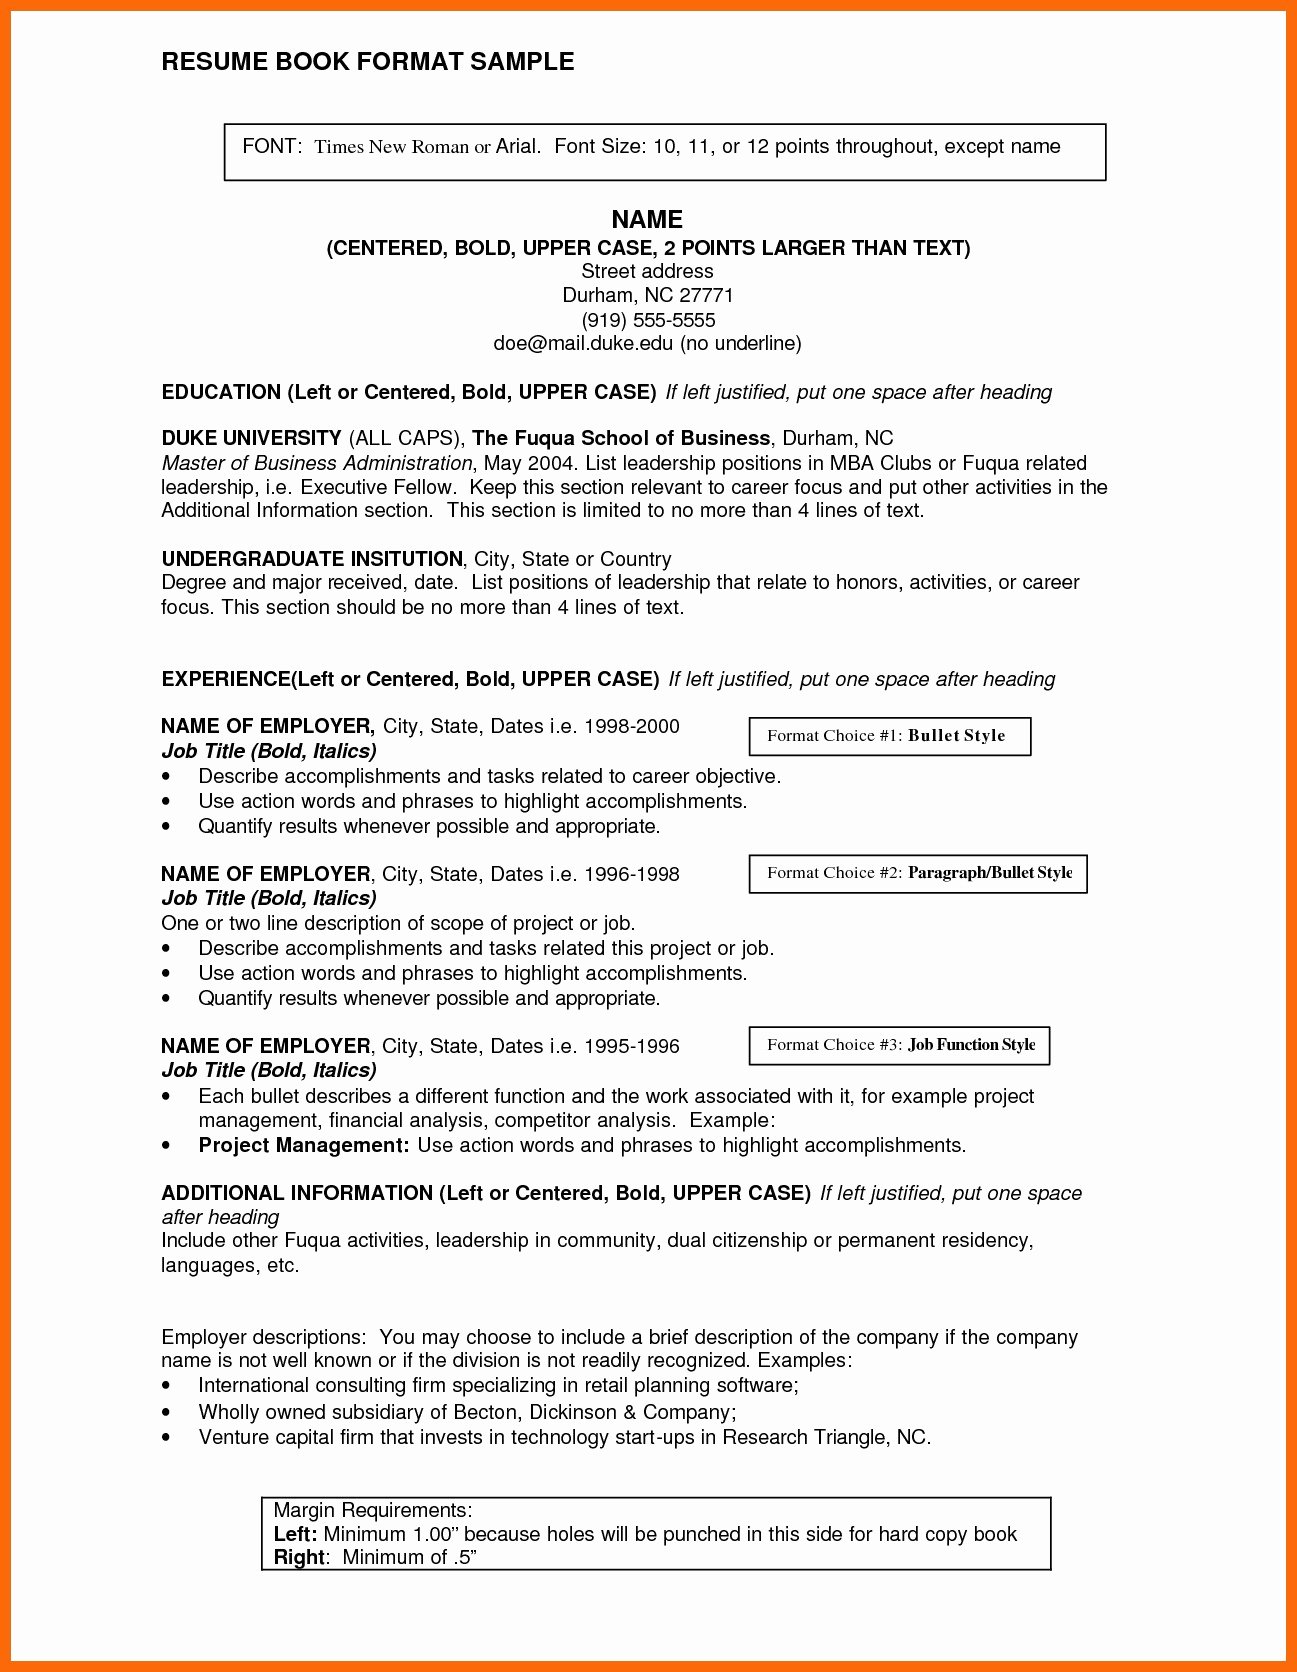 Smallest Font for Resume – Resume Simple Templates